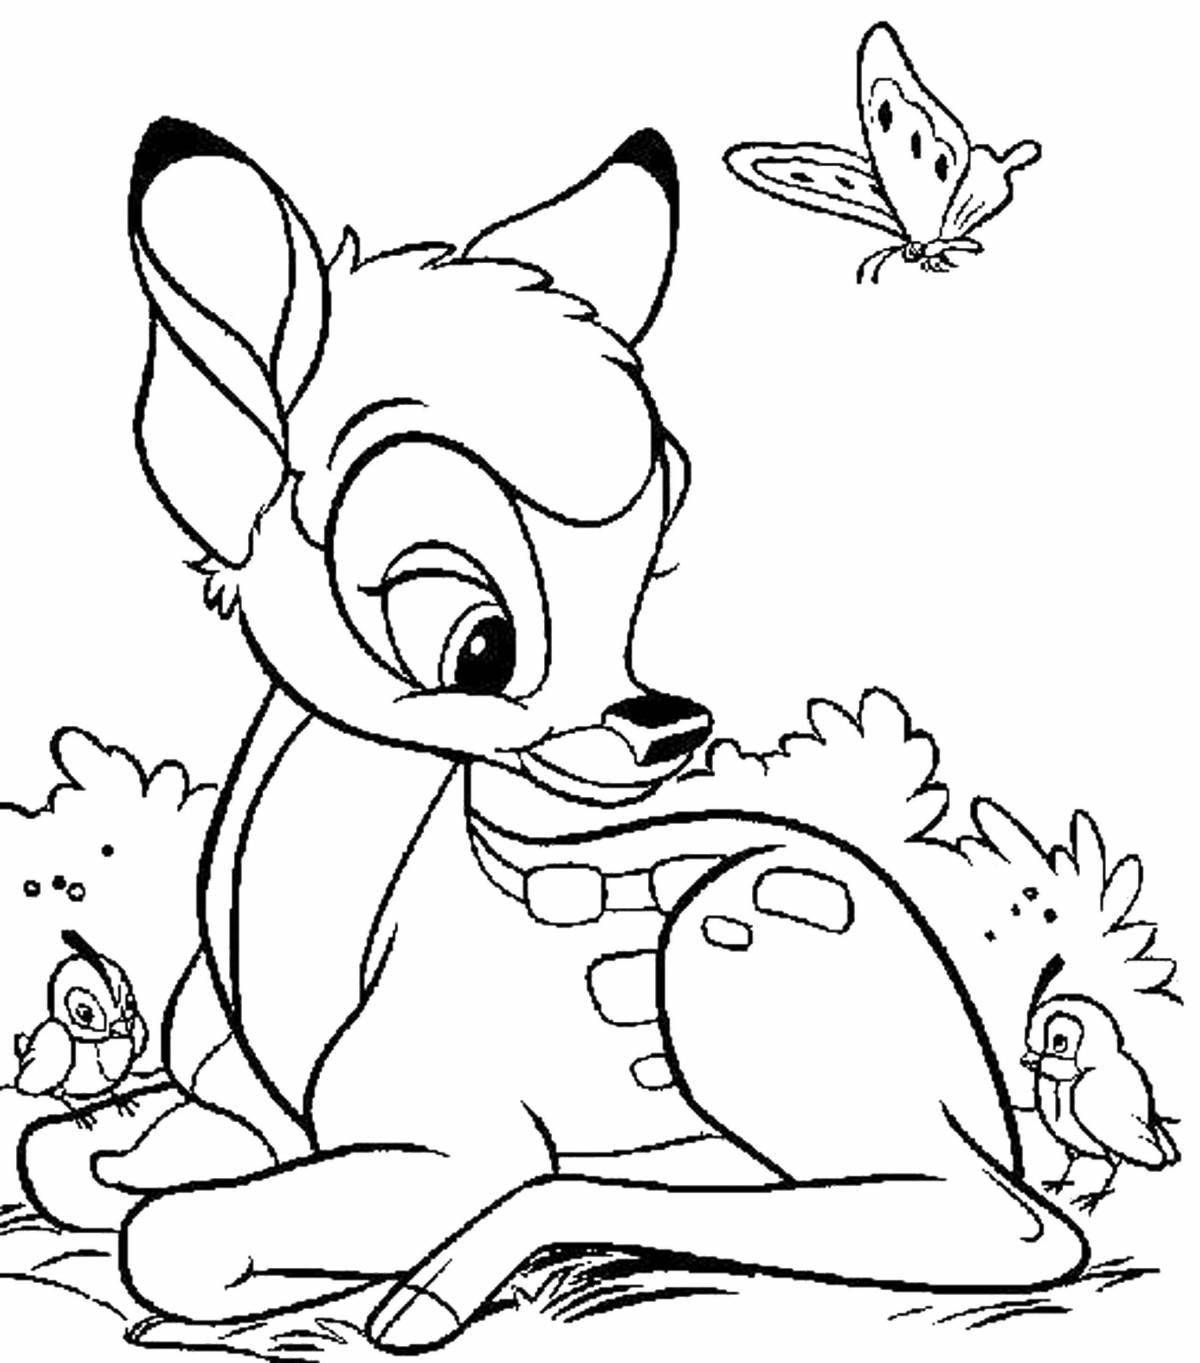 Disney coloring book for kids 6-7 years old